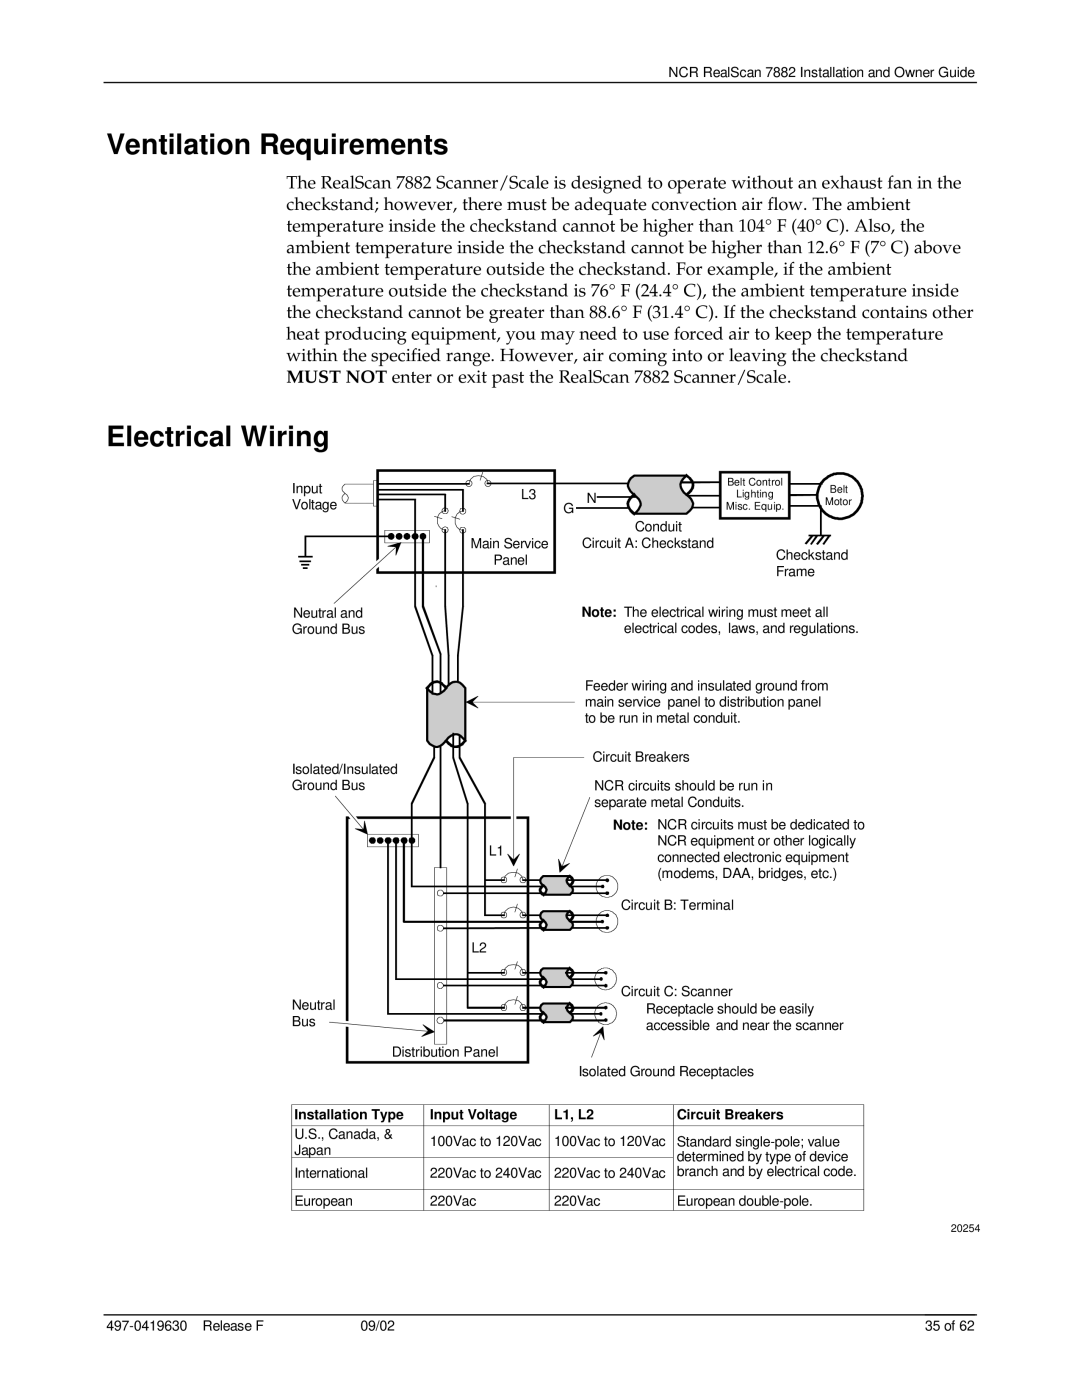 NCR 7882 manual Ventilation Requirements, Electrical Wiring, Installation Type, Input Voltage, L1, L2, Circuit Breakers 